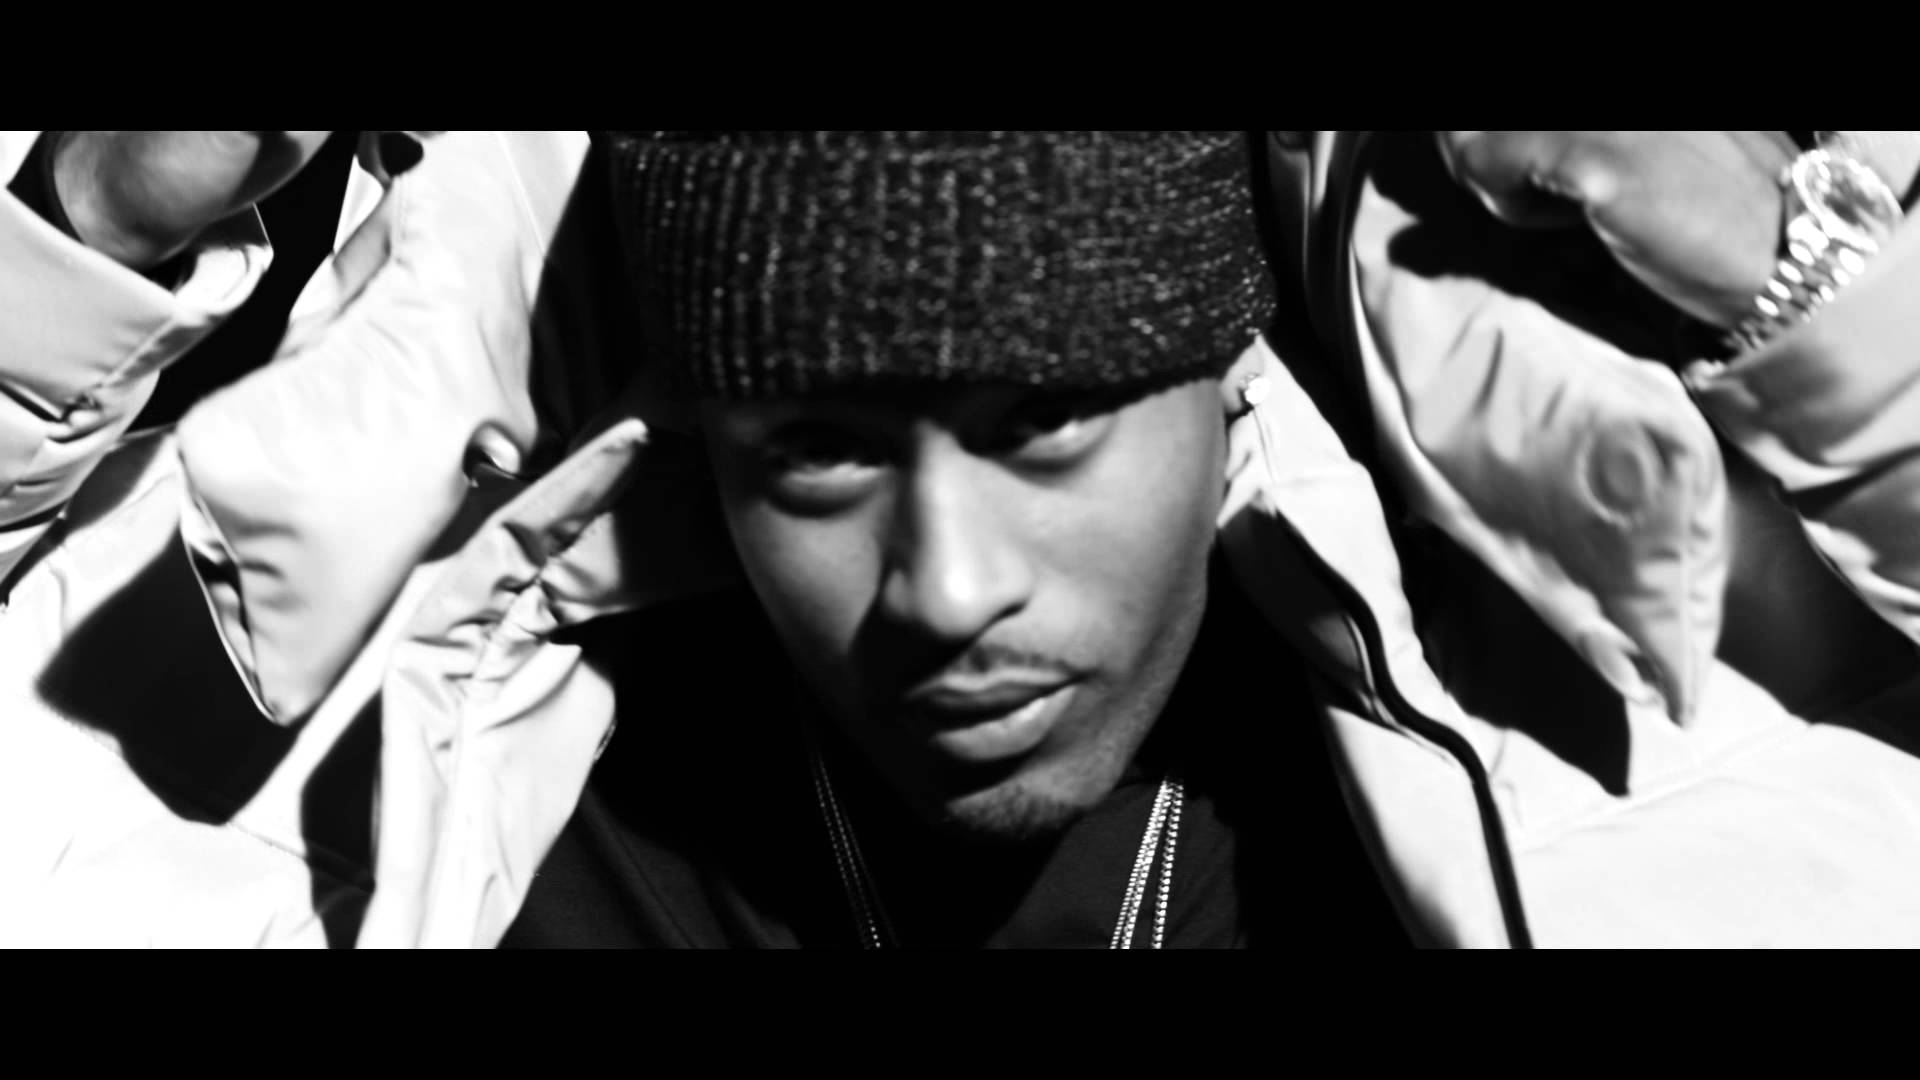 P.Reign – “You Know” (Video)